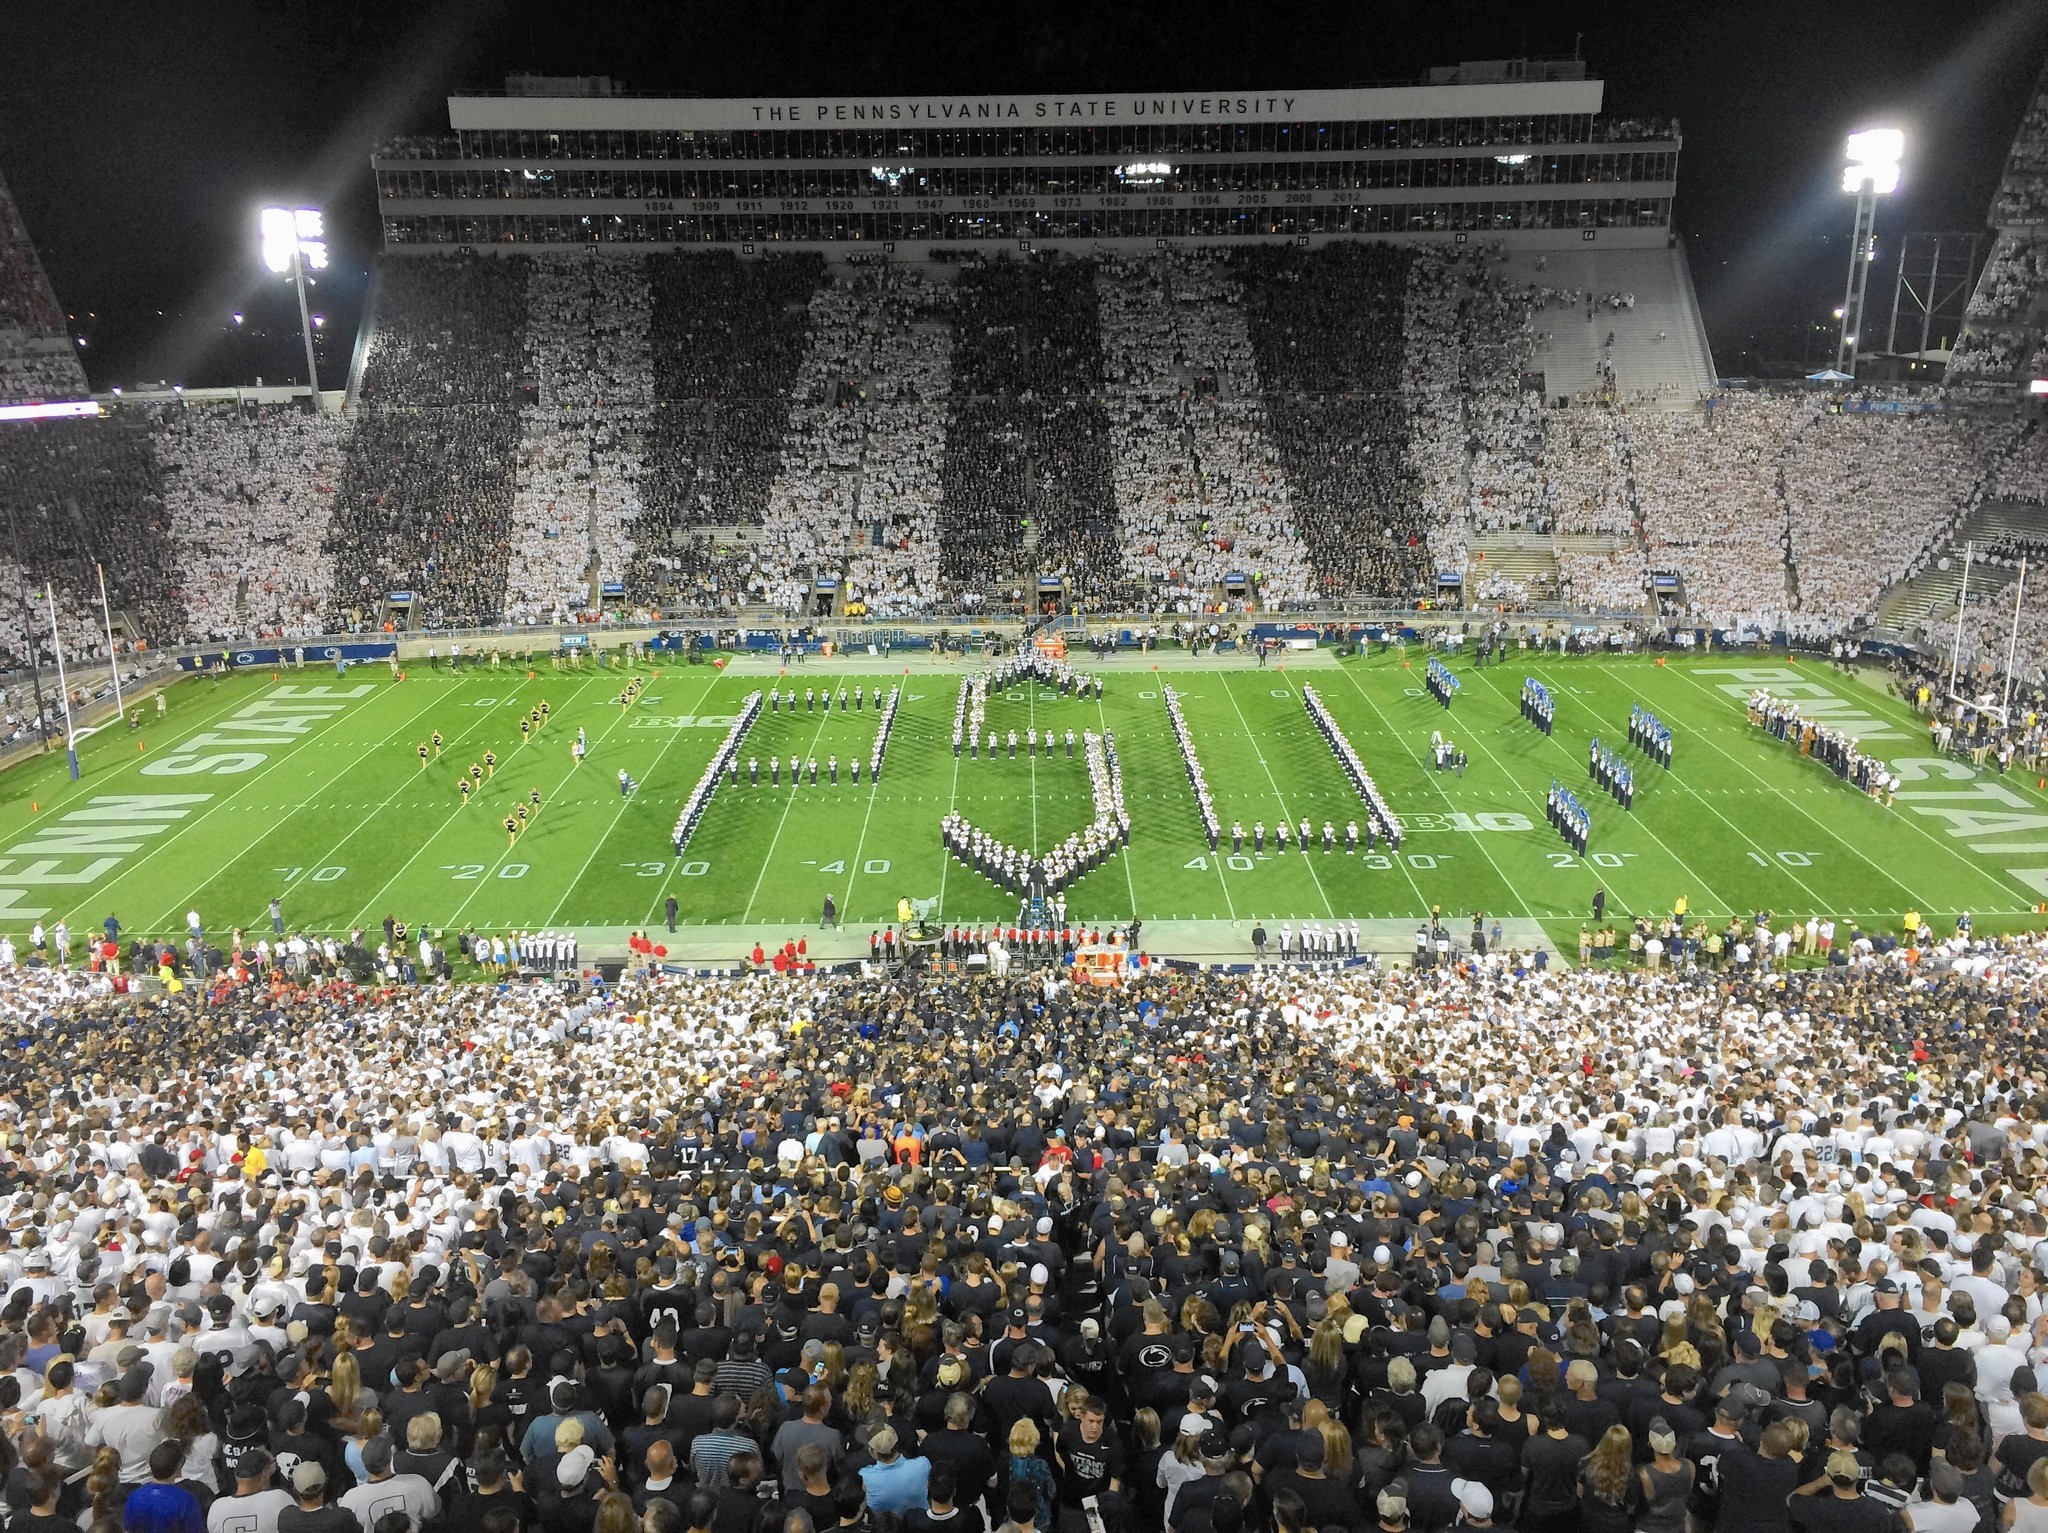 Penn State memorial causes national uproar